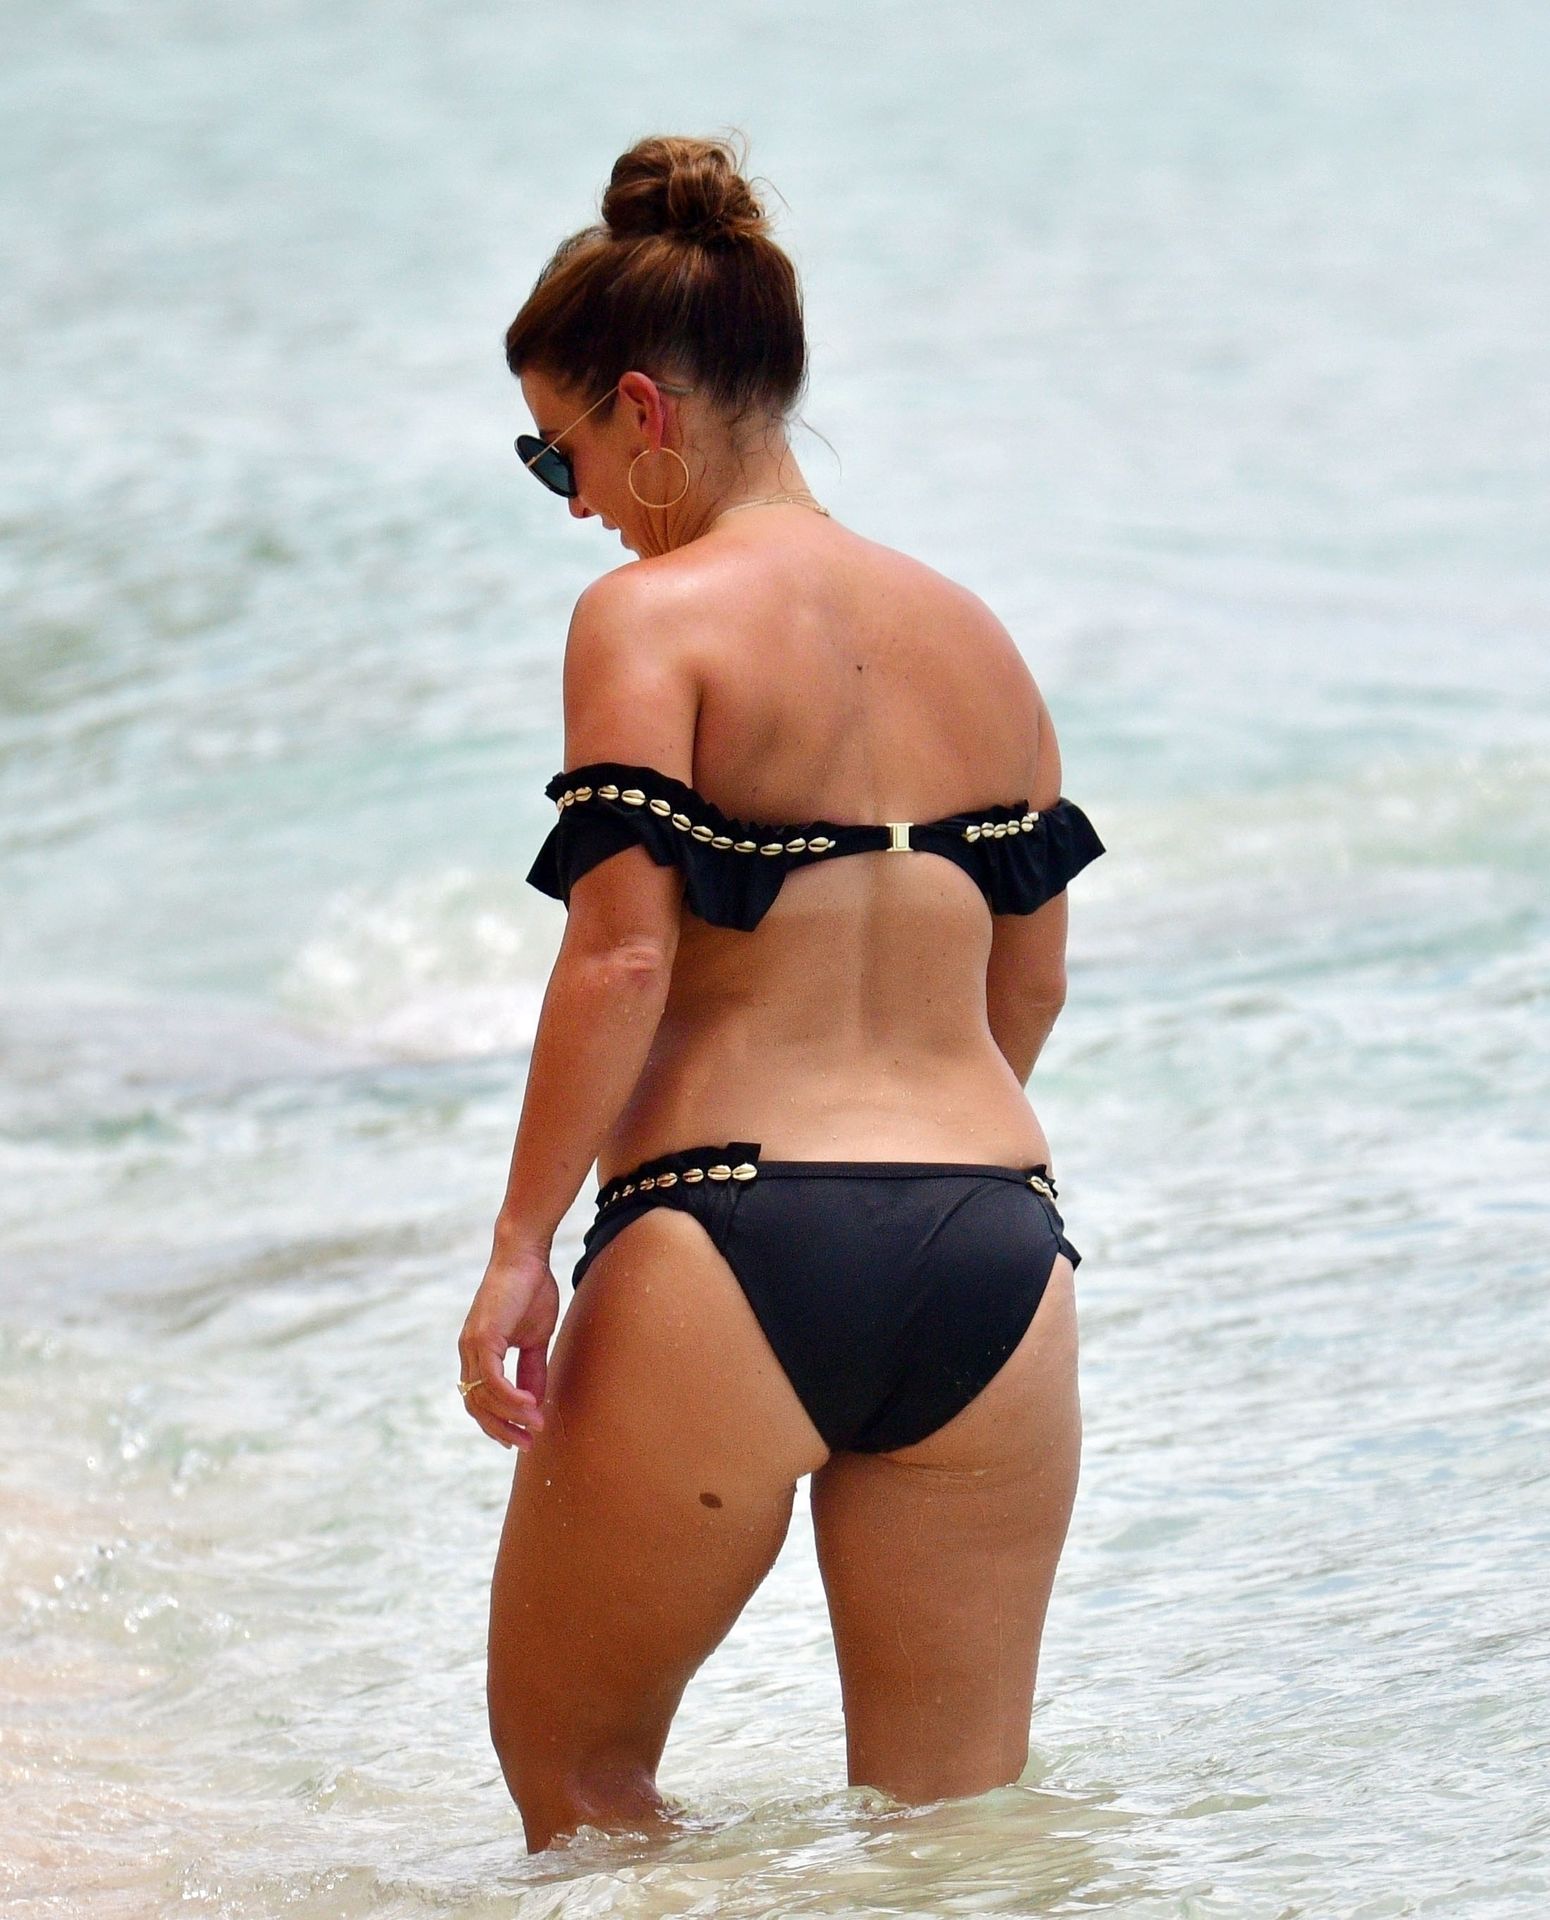 Coleen Rooney Dons Her Skimpy Black B
ikini on Holiday in Barbados (166 Photos)